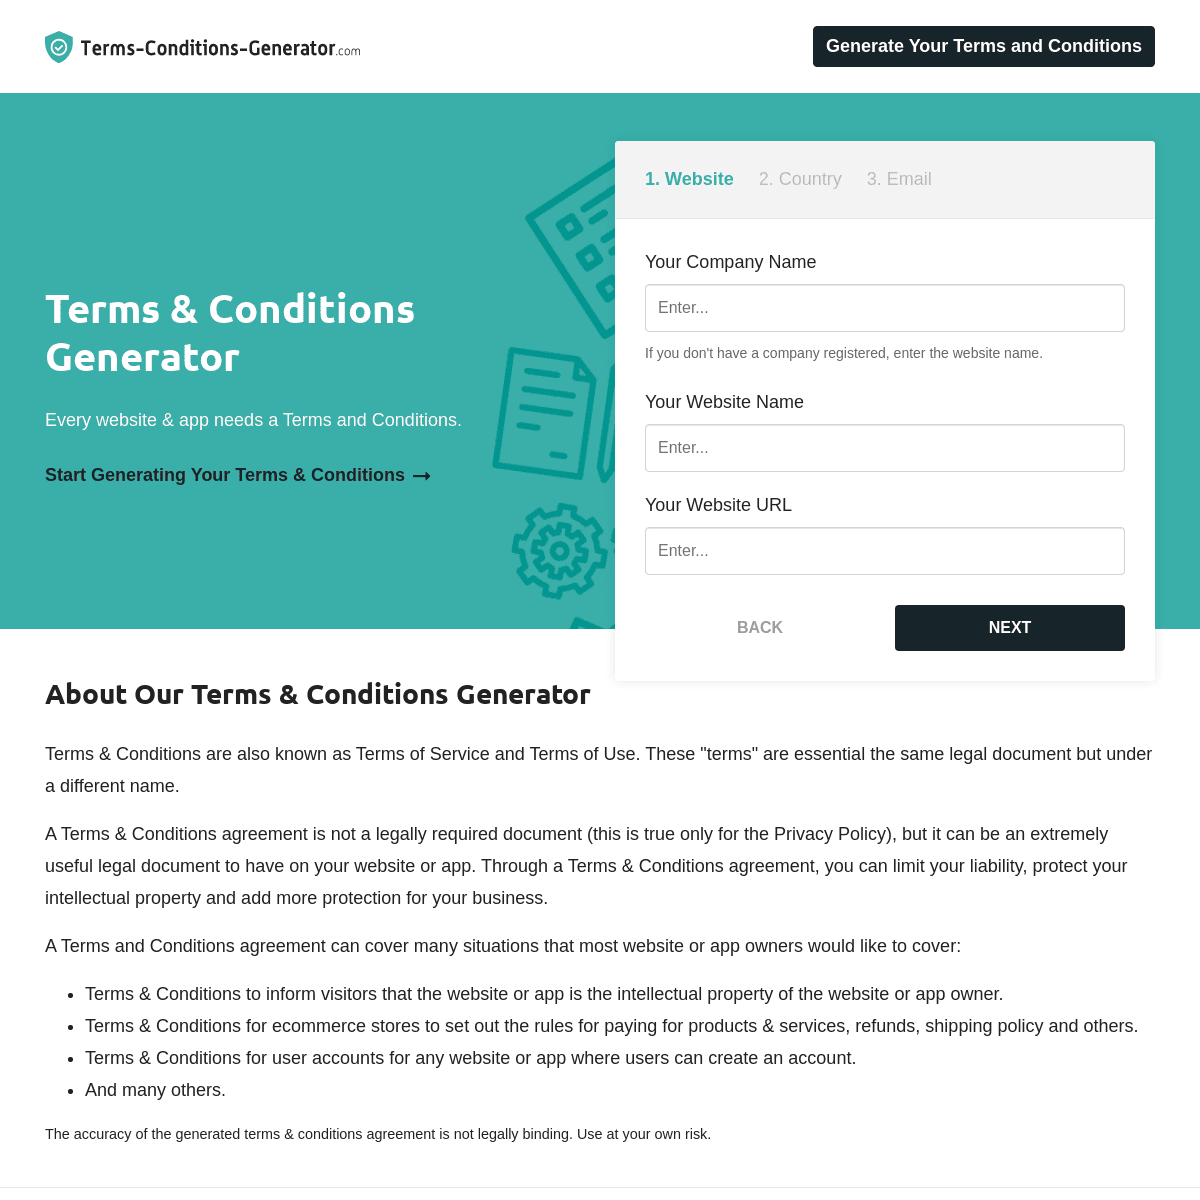 A complete backup of https://terms-conditions-generator.com